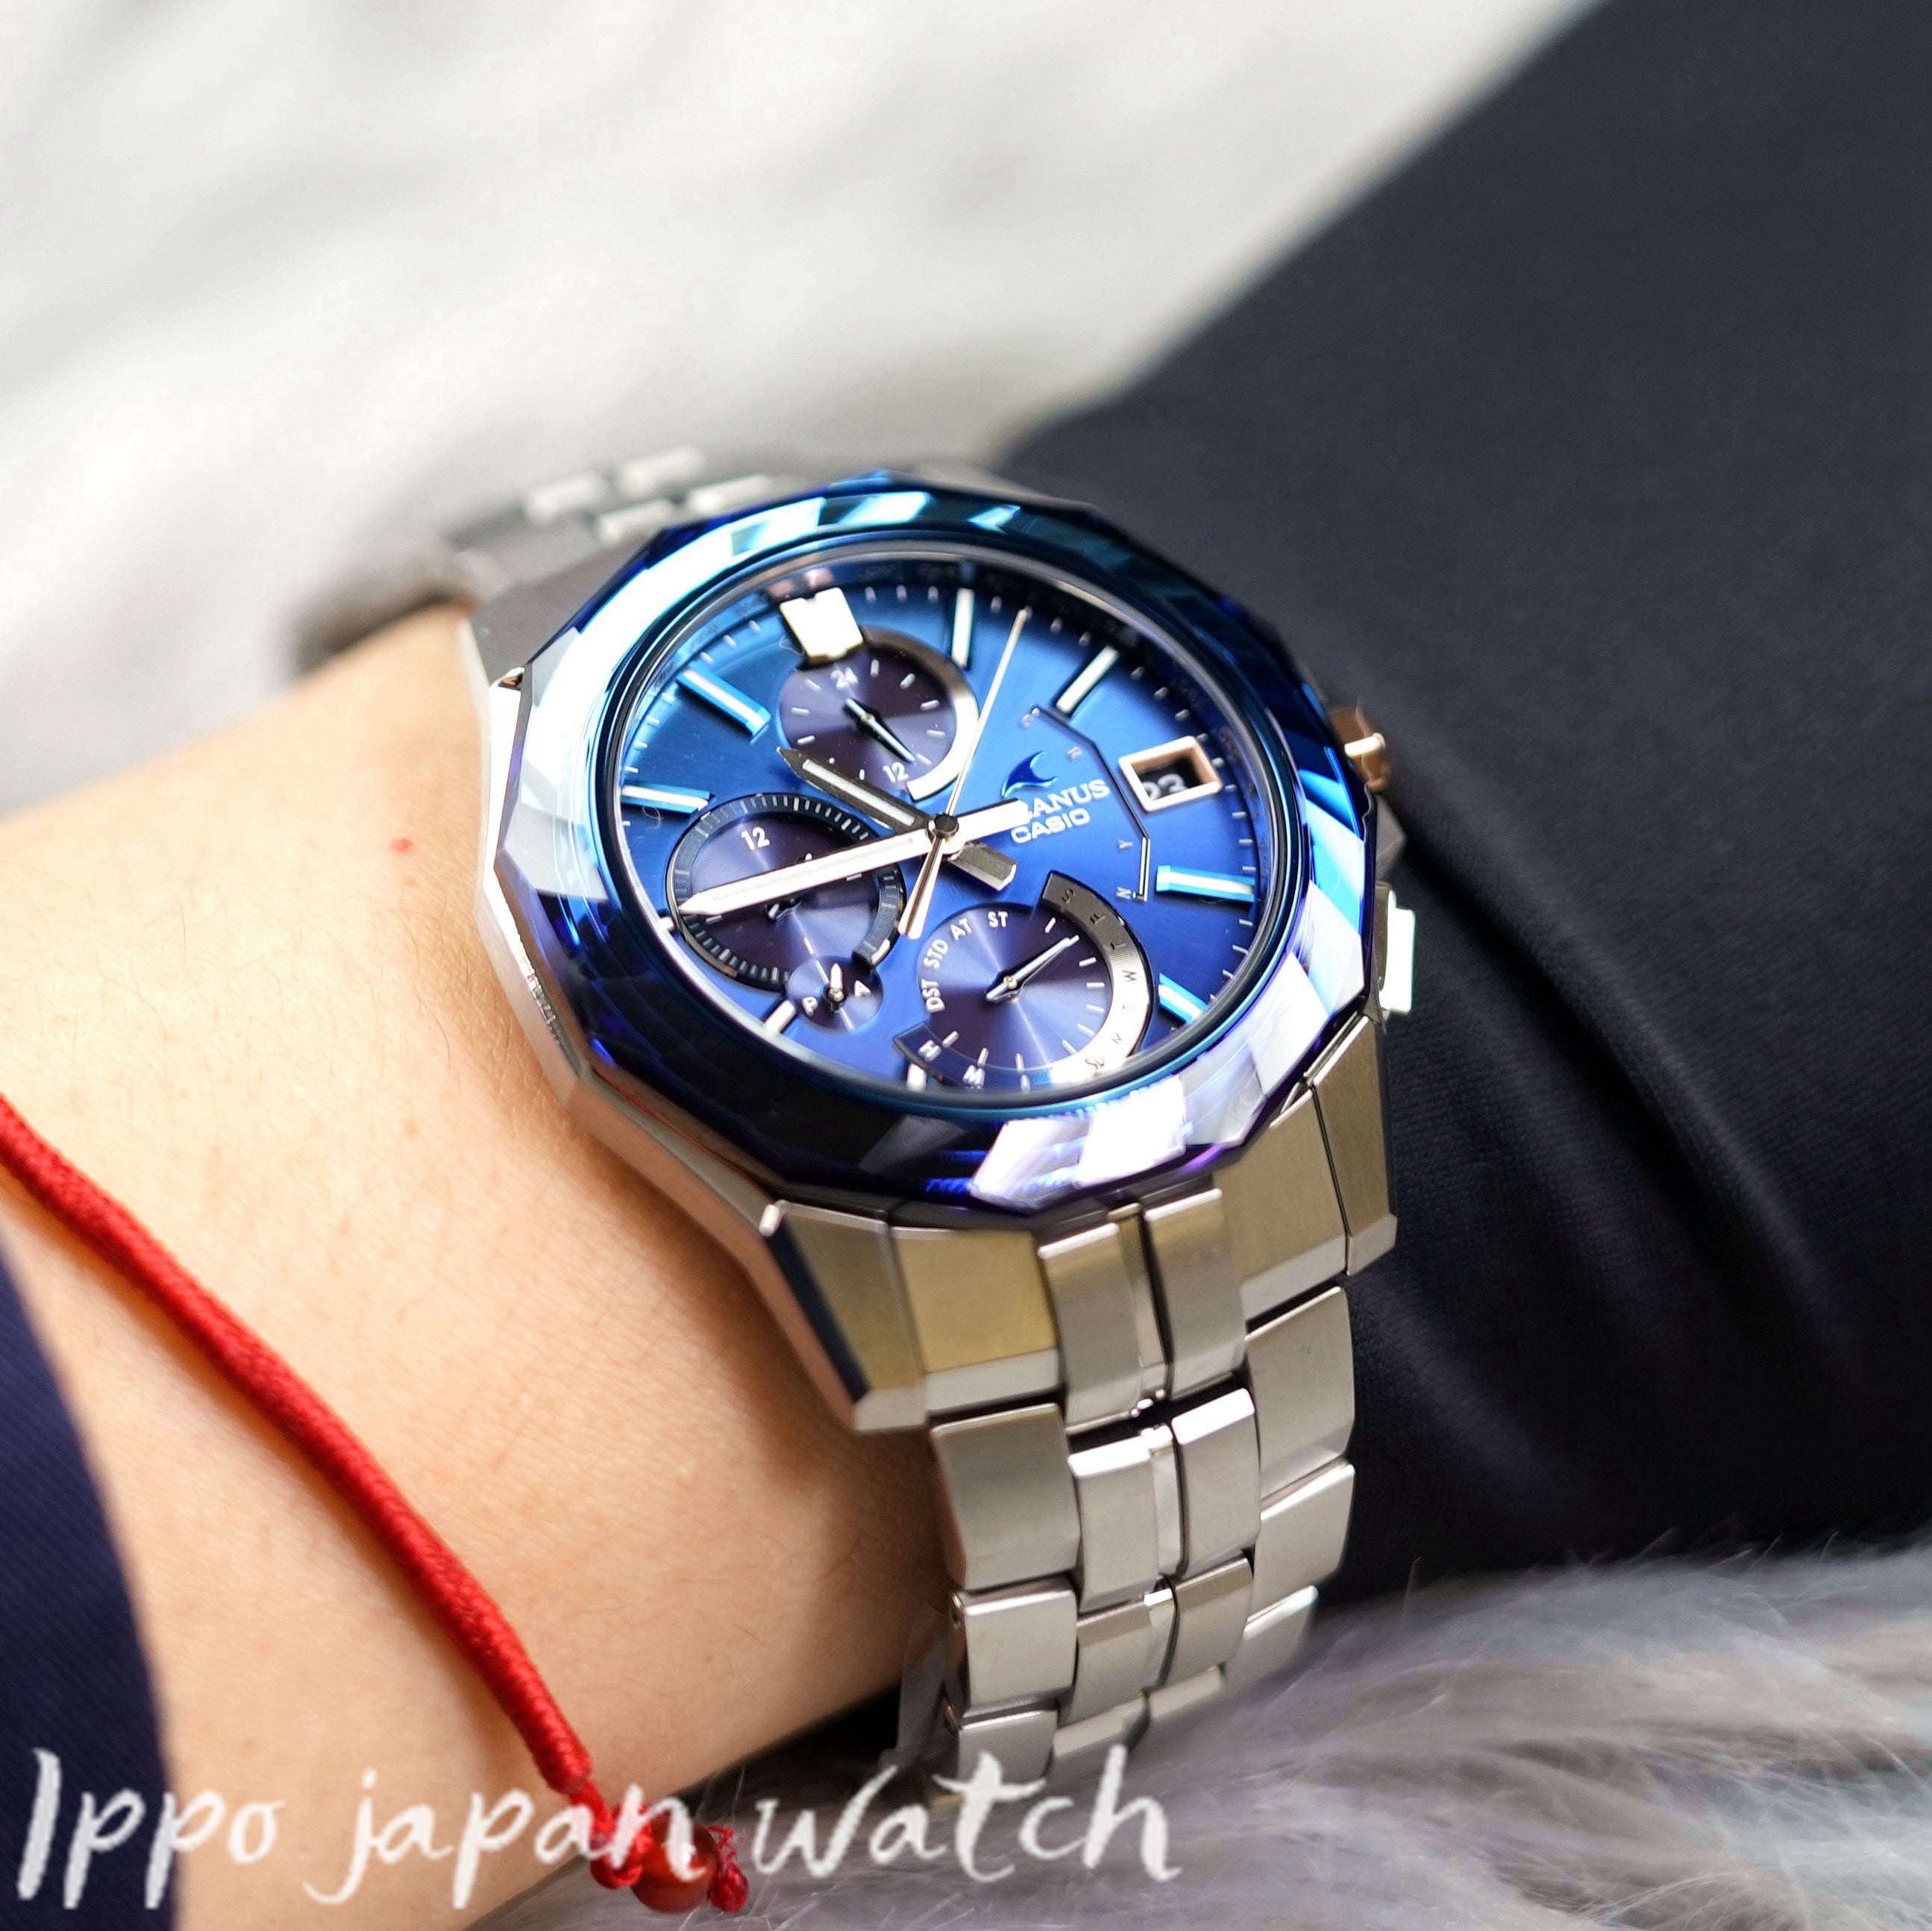 New Release: Casio Oceanus Manta Watches With Sapphire Crystal